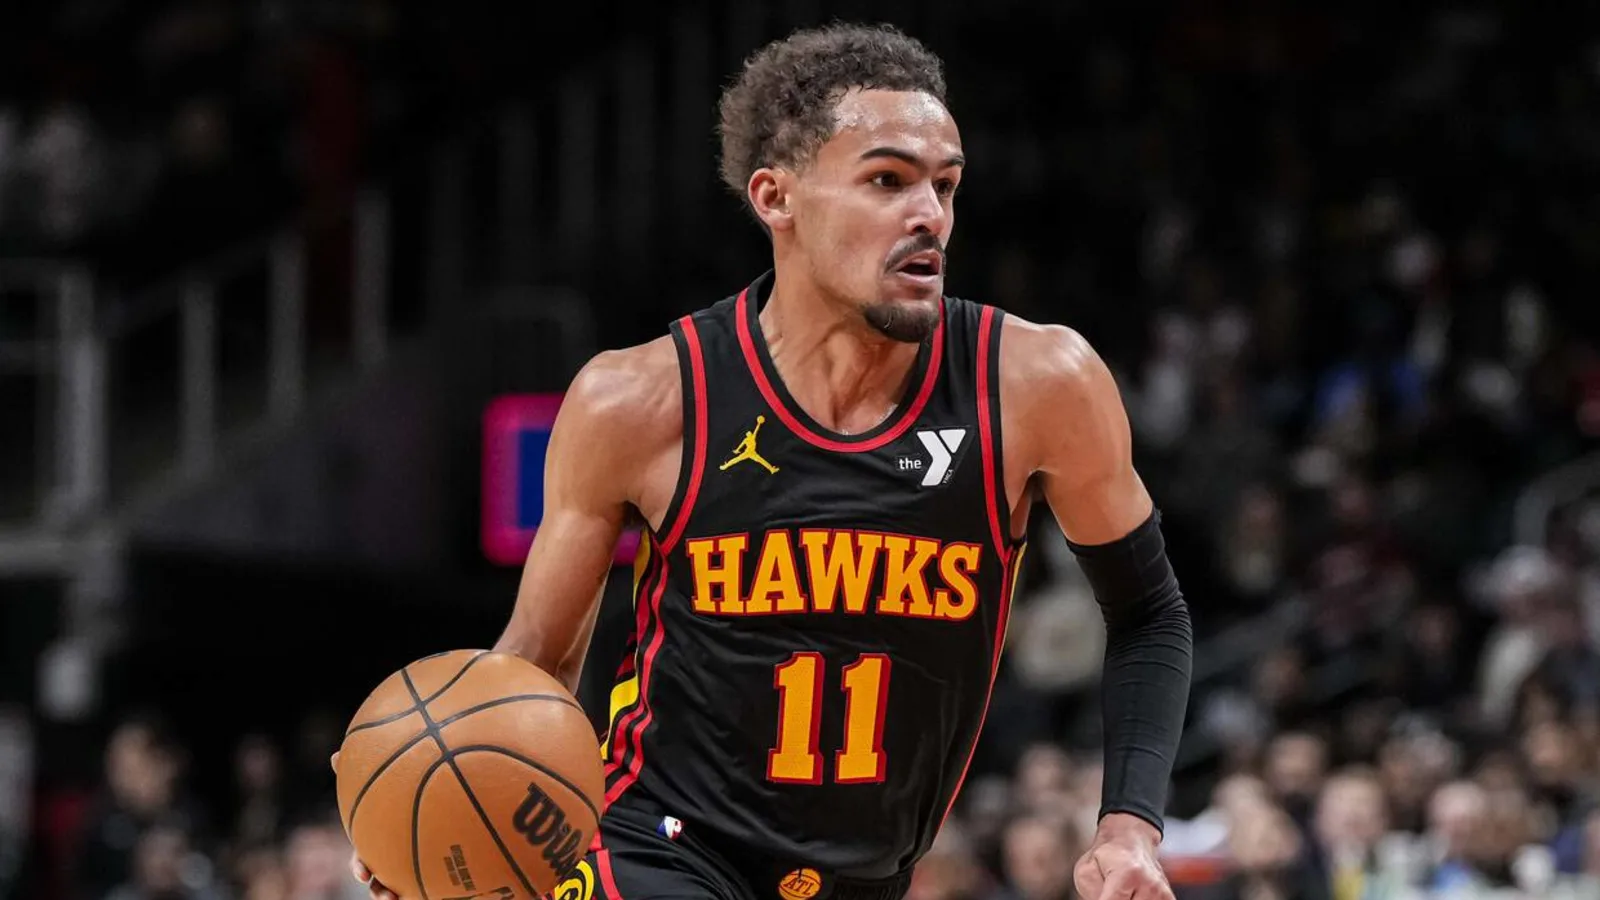 Breaking News: Atlanta Hawks Guard Trae Young Sidelined by Concussion, Uncertain Return Sparks Concern